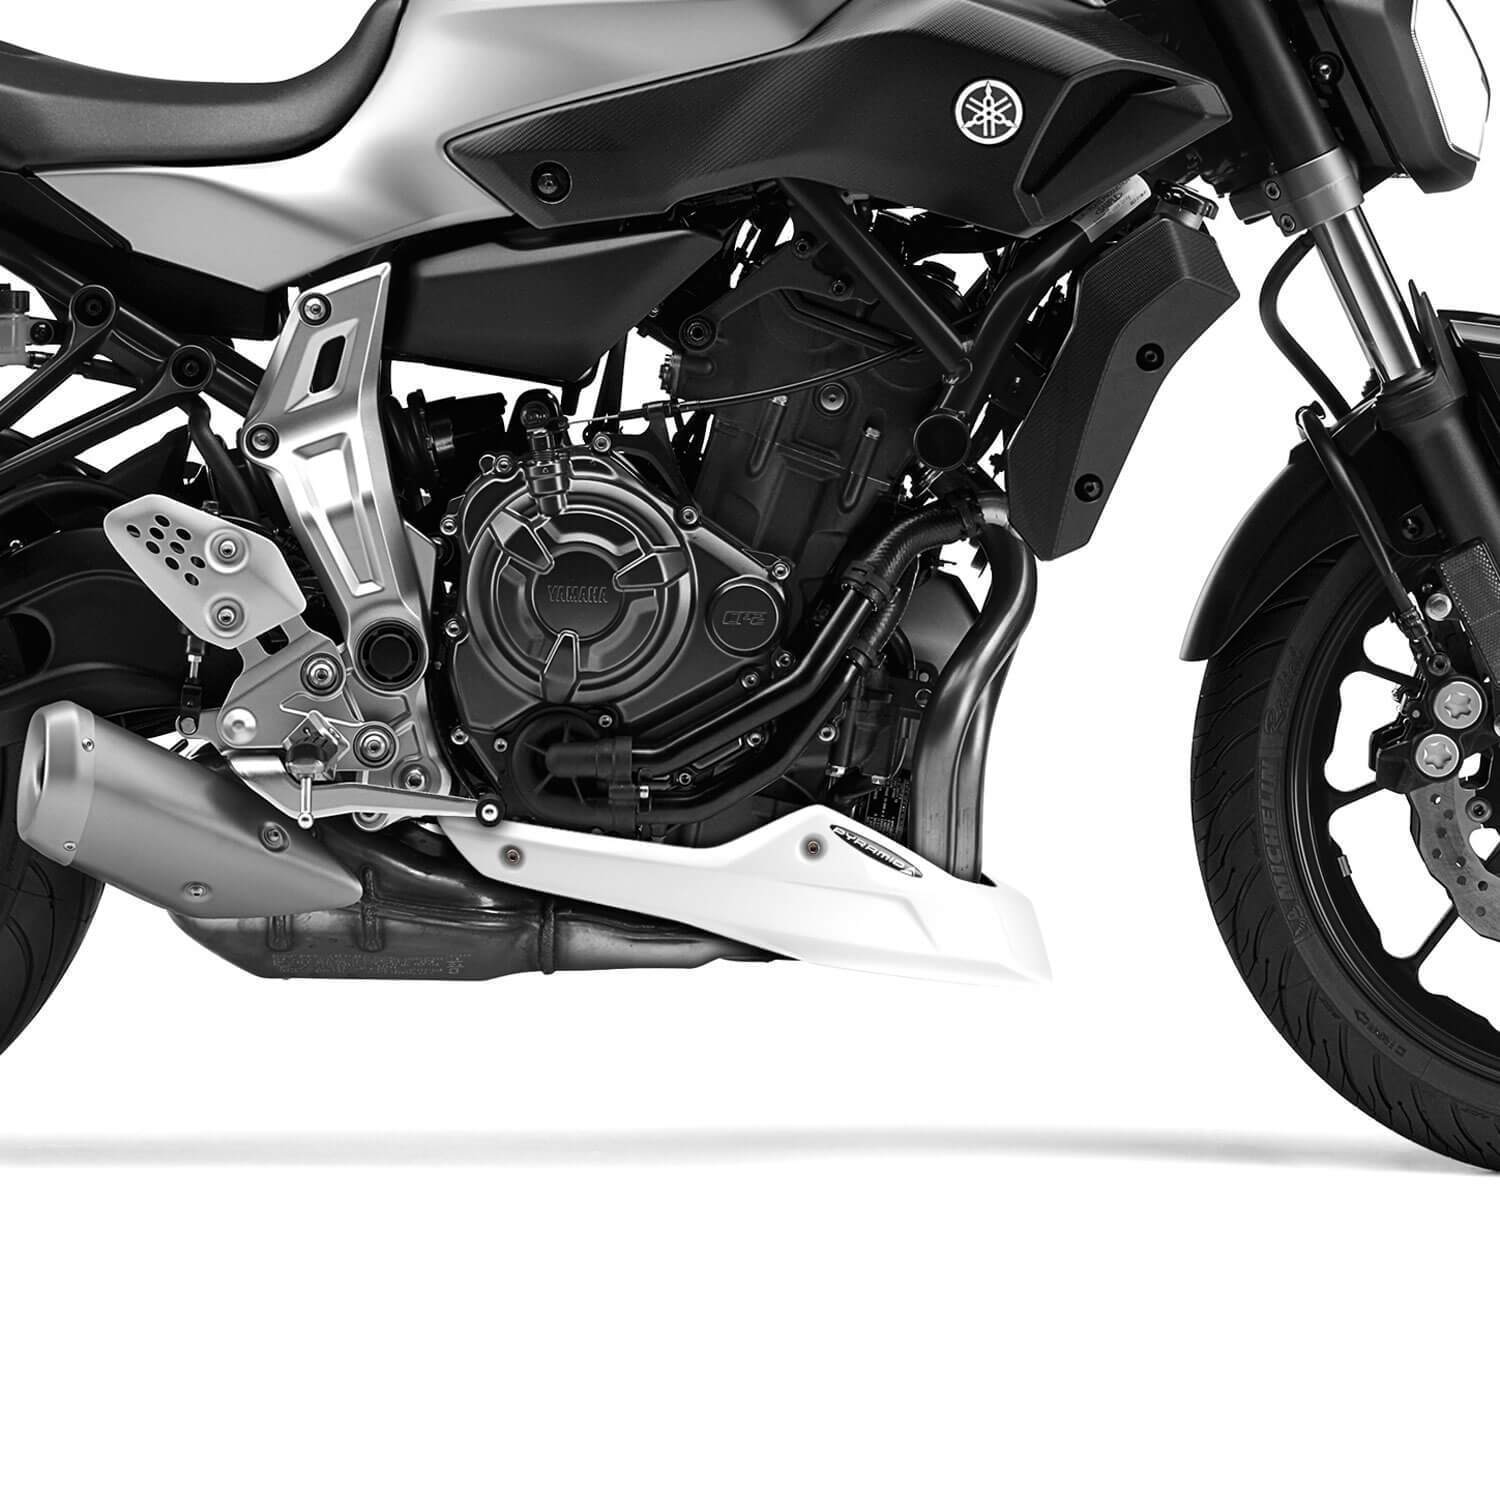 Pyramid Belly Pan | Gloss White | Yamaha MT-07 2013>Current-22136C-Belly Pans-Pyramid Motorcycle Accessories